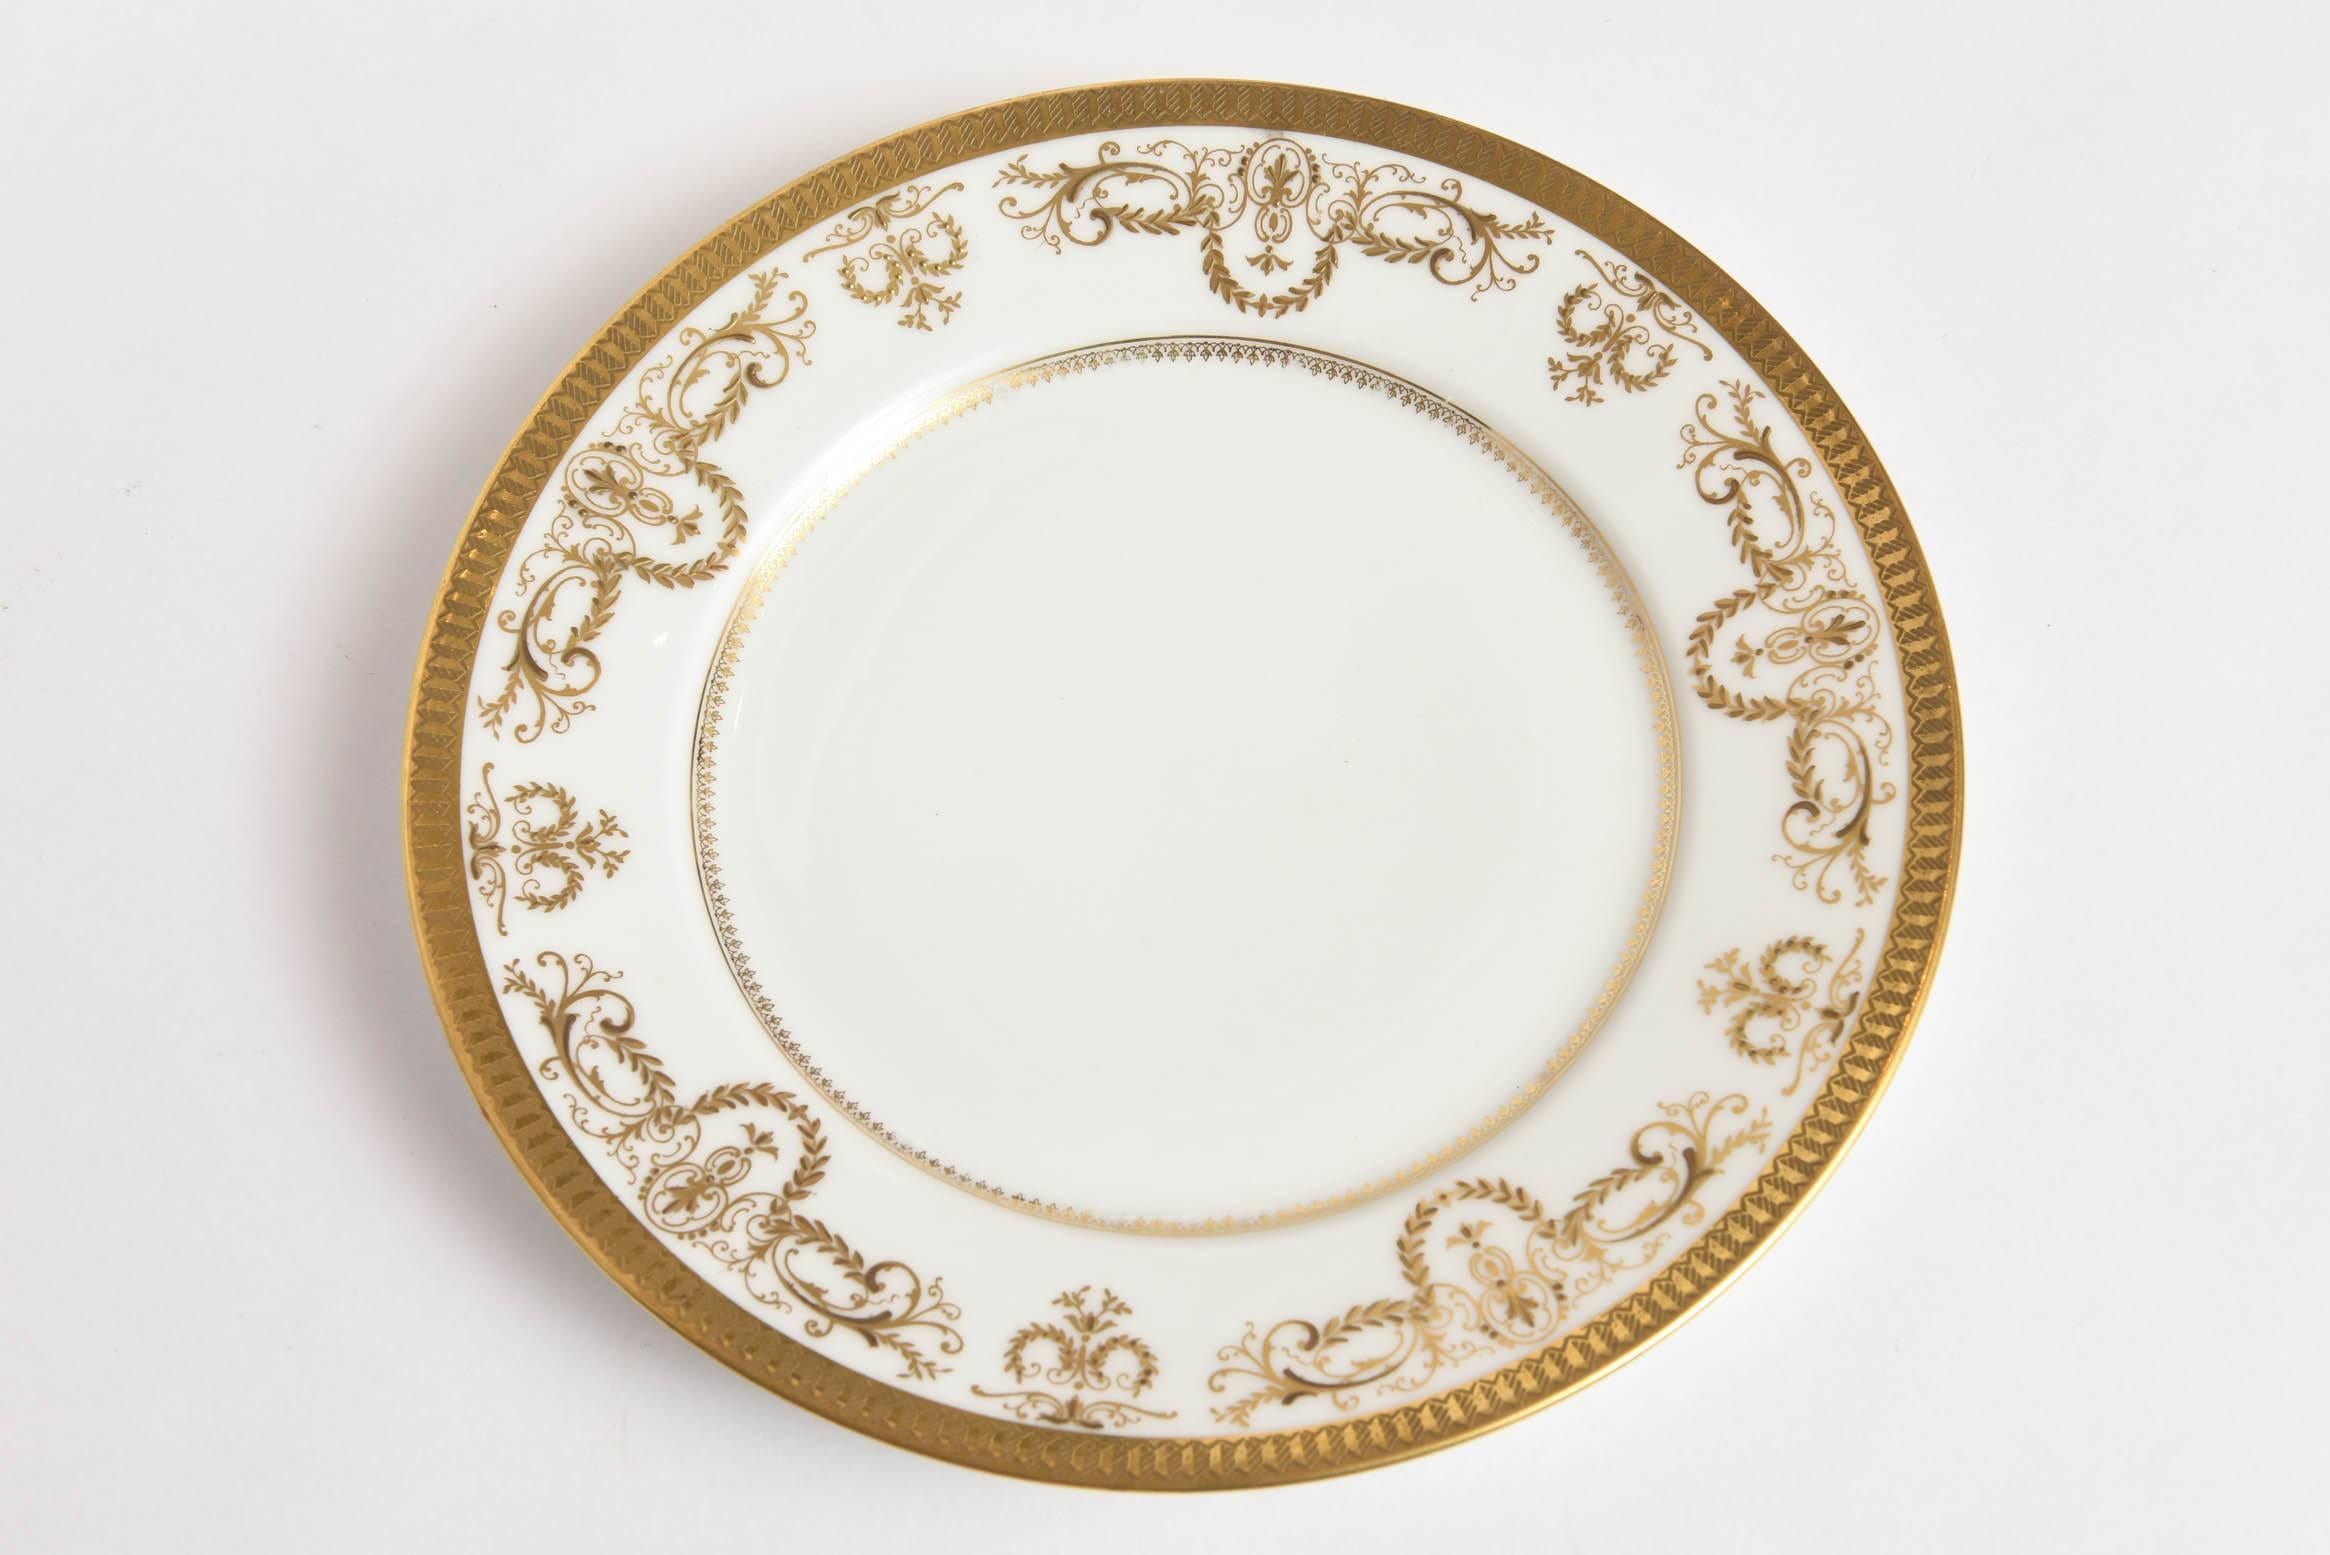 Late 19th Century Set of 10 Dessert Plates White and Gold, Limoges France, Antique